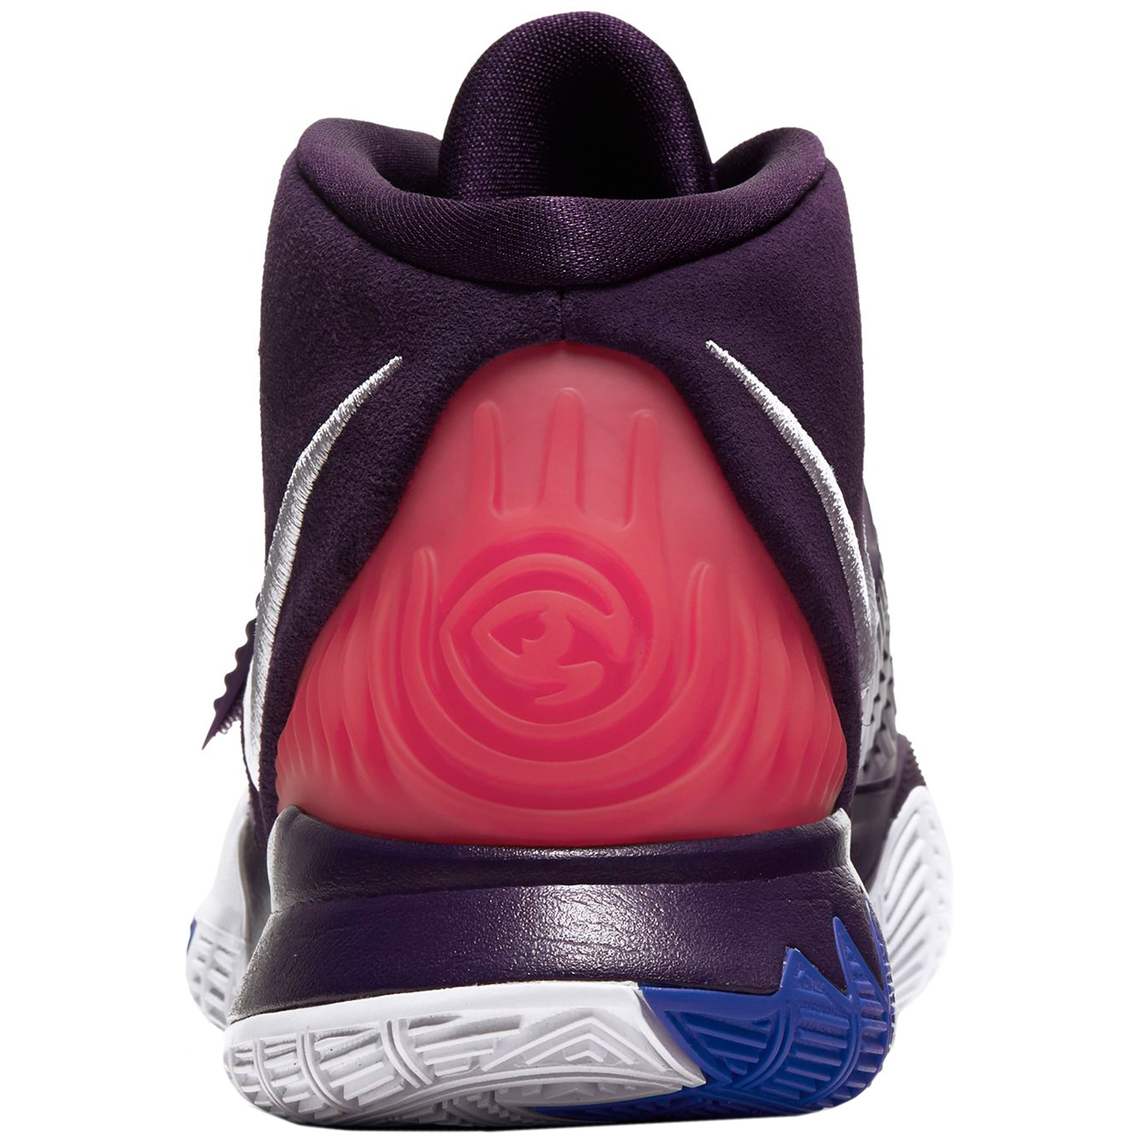 Nike Men's Kyrie VI Court Shoes - Image 4 of 7